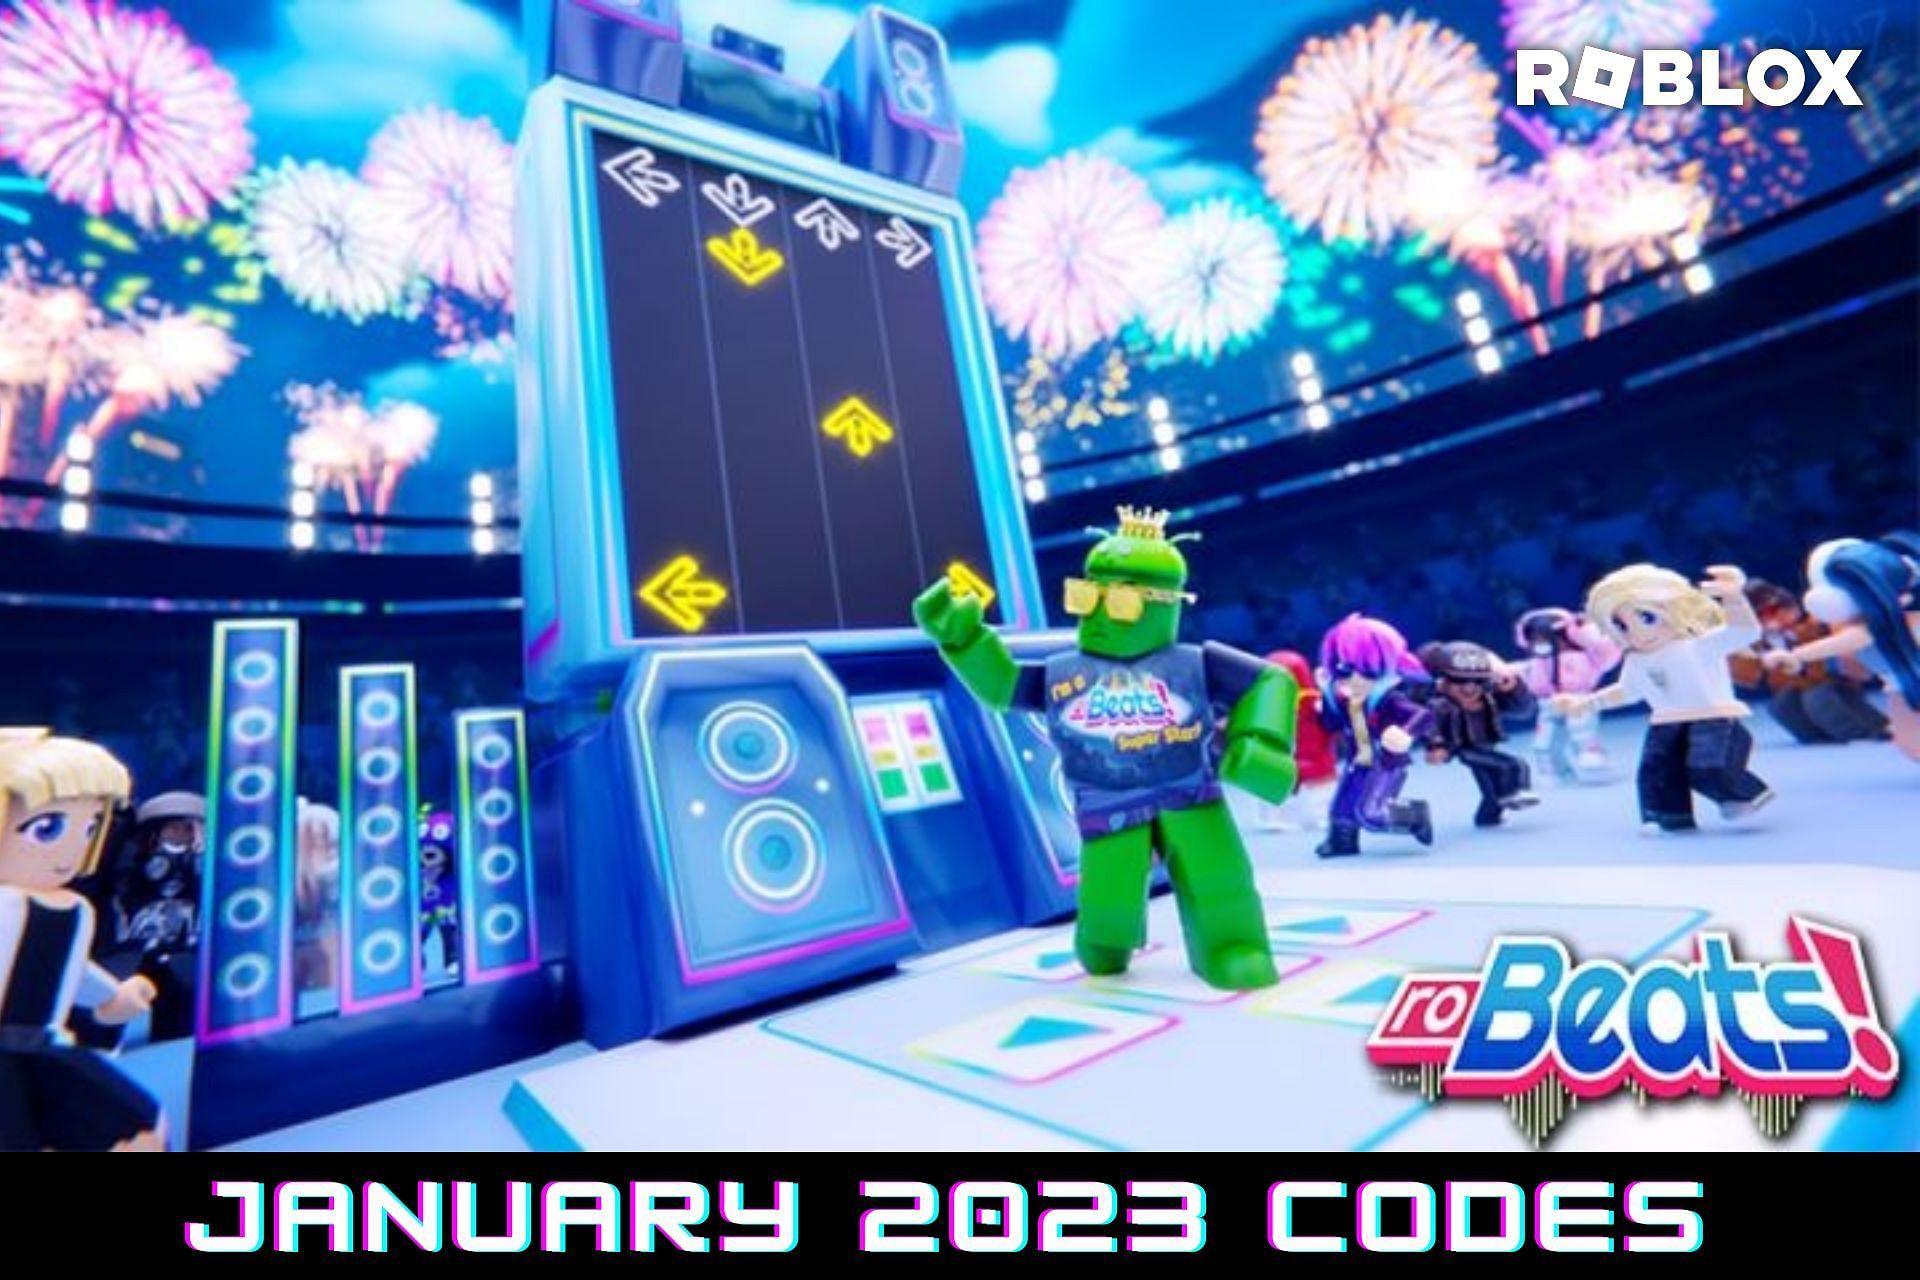 3 NEW Roblox PROMO CODES 2023 All FREE ROBUX Items in JANUARY + EVENT All  Free Items on Roblox 